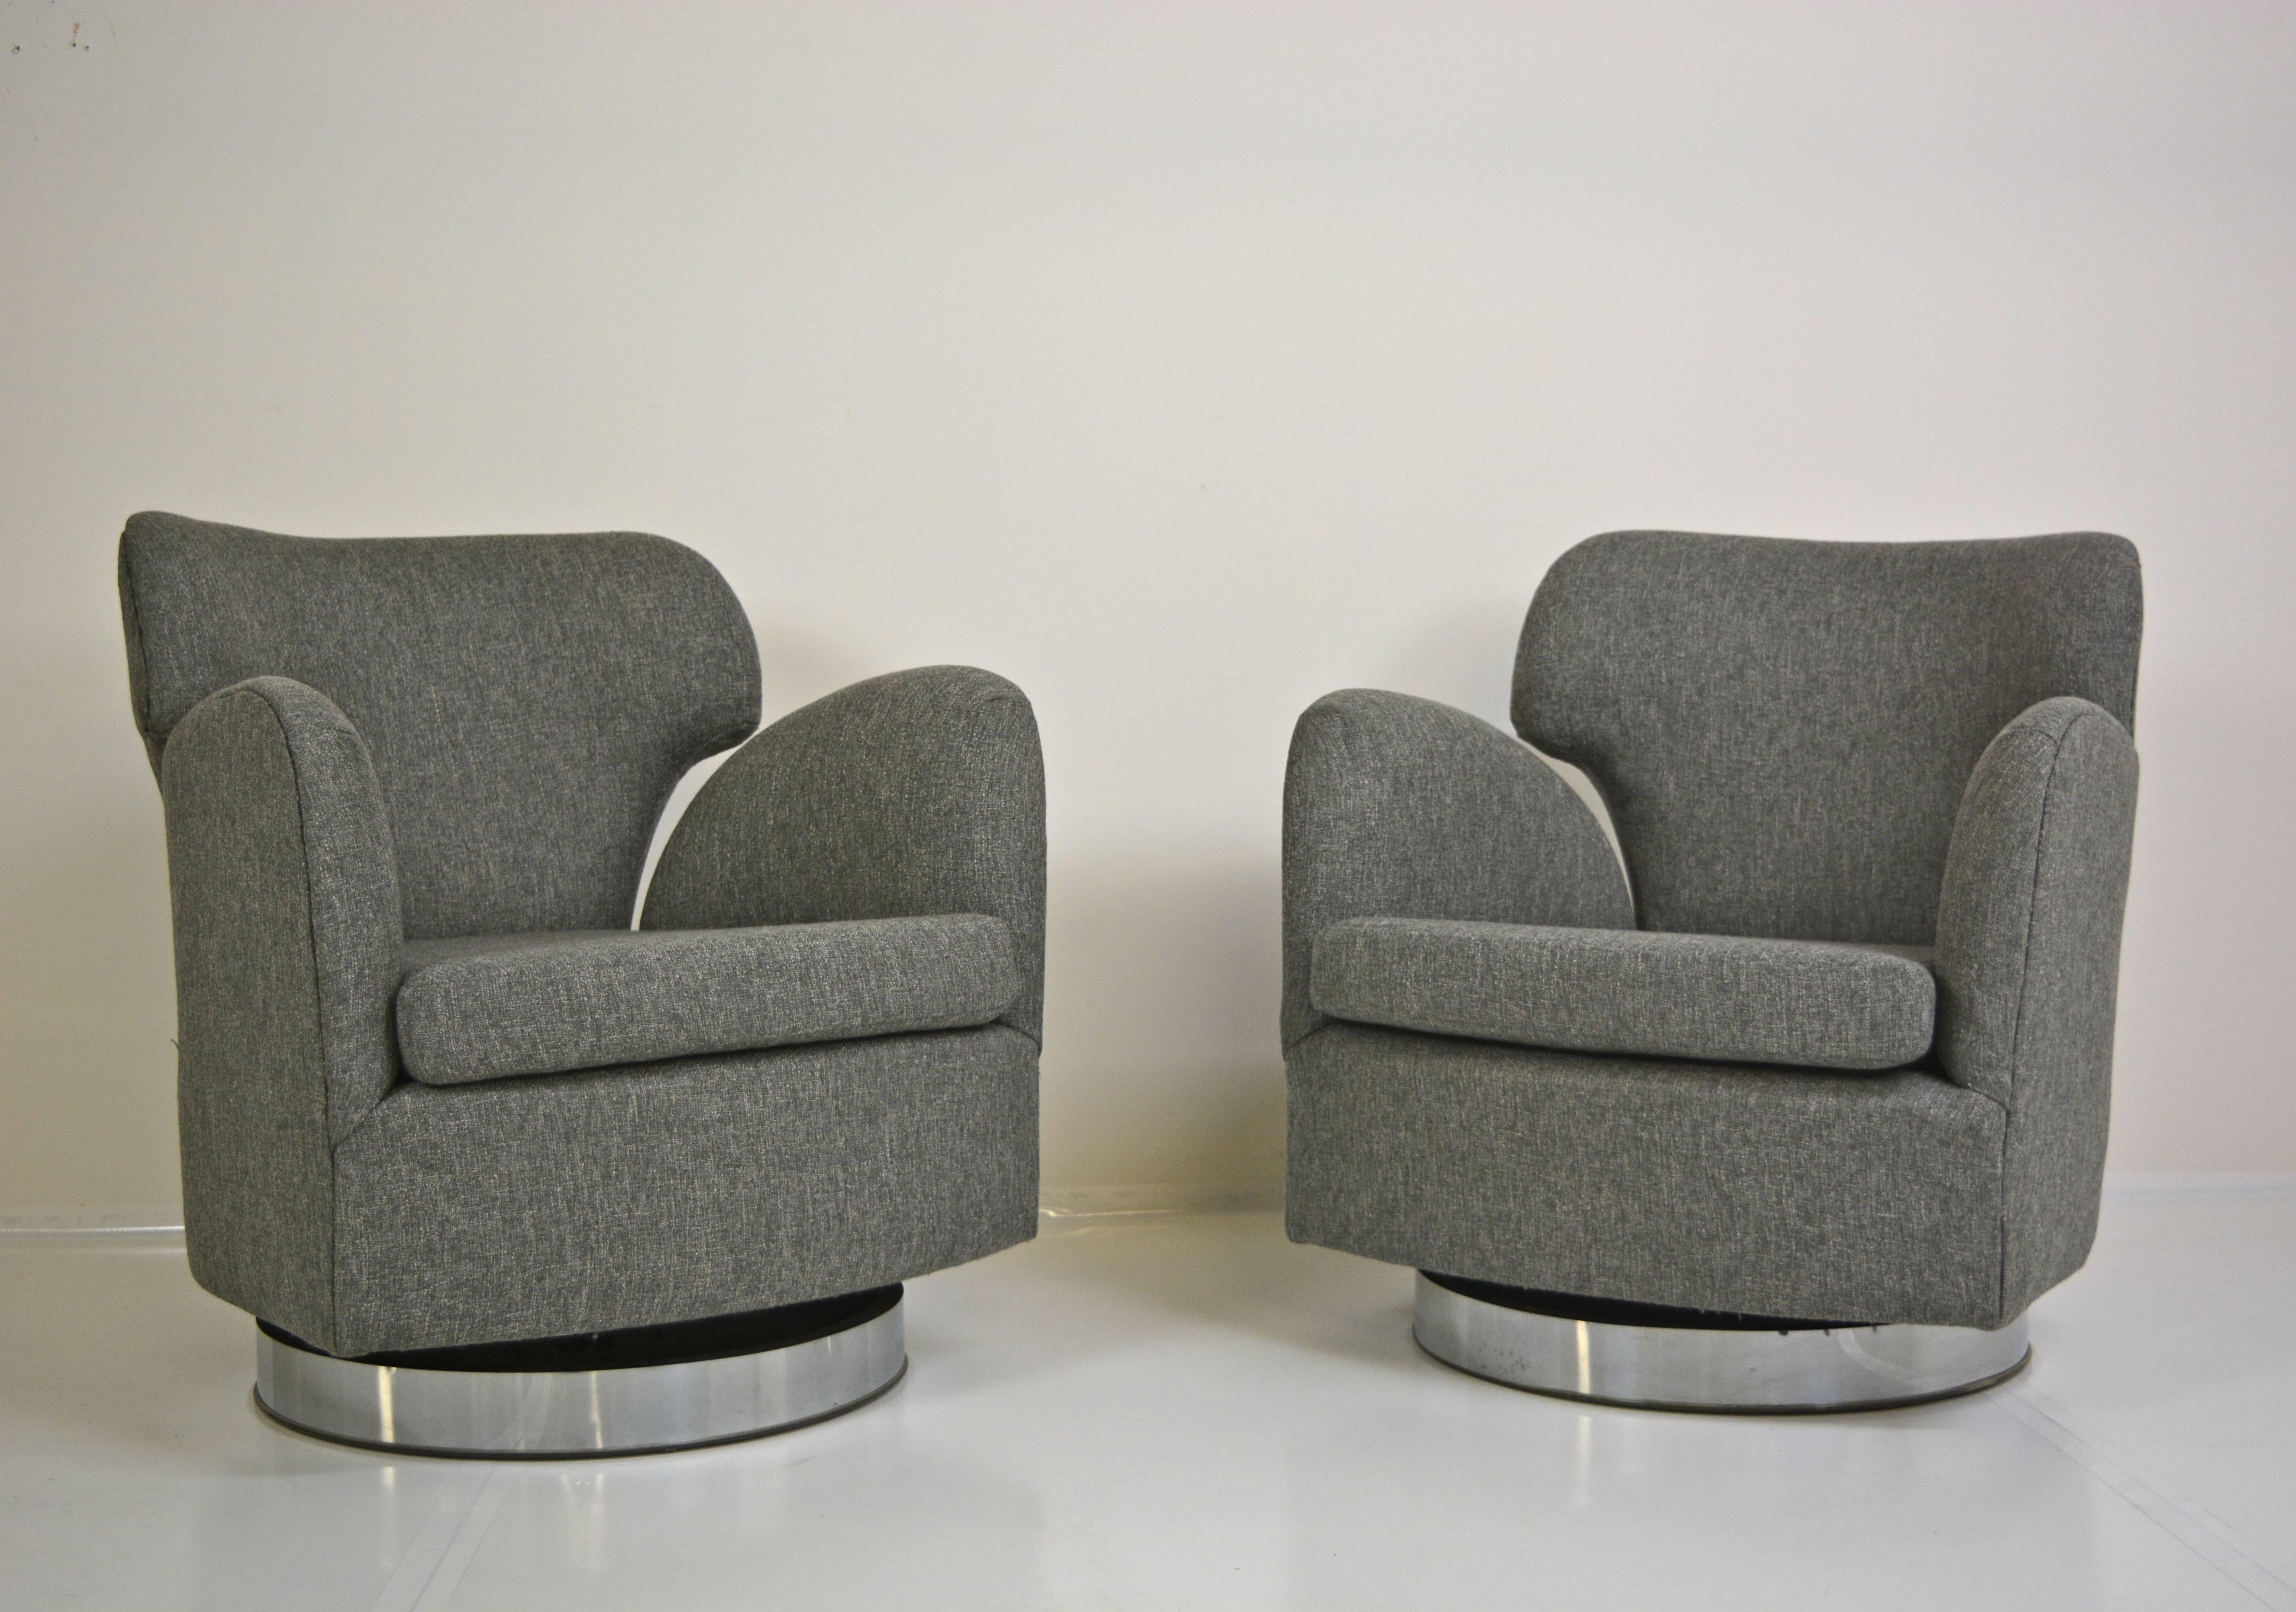 Pair of swivel chairs with reclining backs. Newly upholstered in lightly textured gray fabric. Designed by Milo Baughman, circa 1960s. 
(One additional matching pair also available).